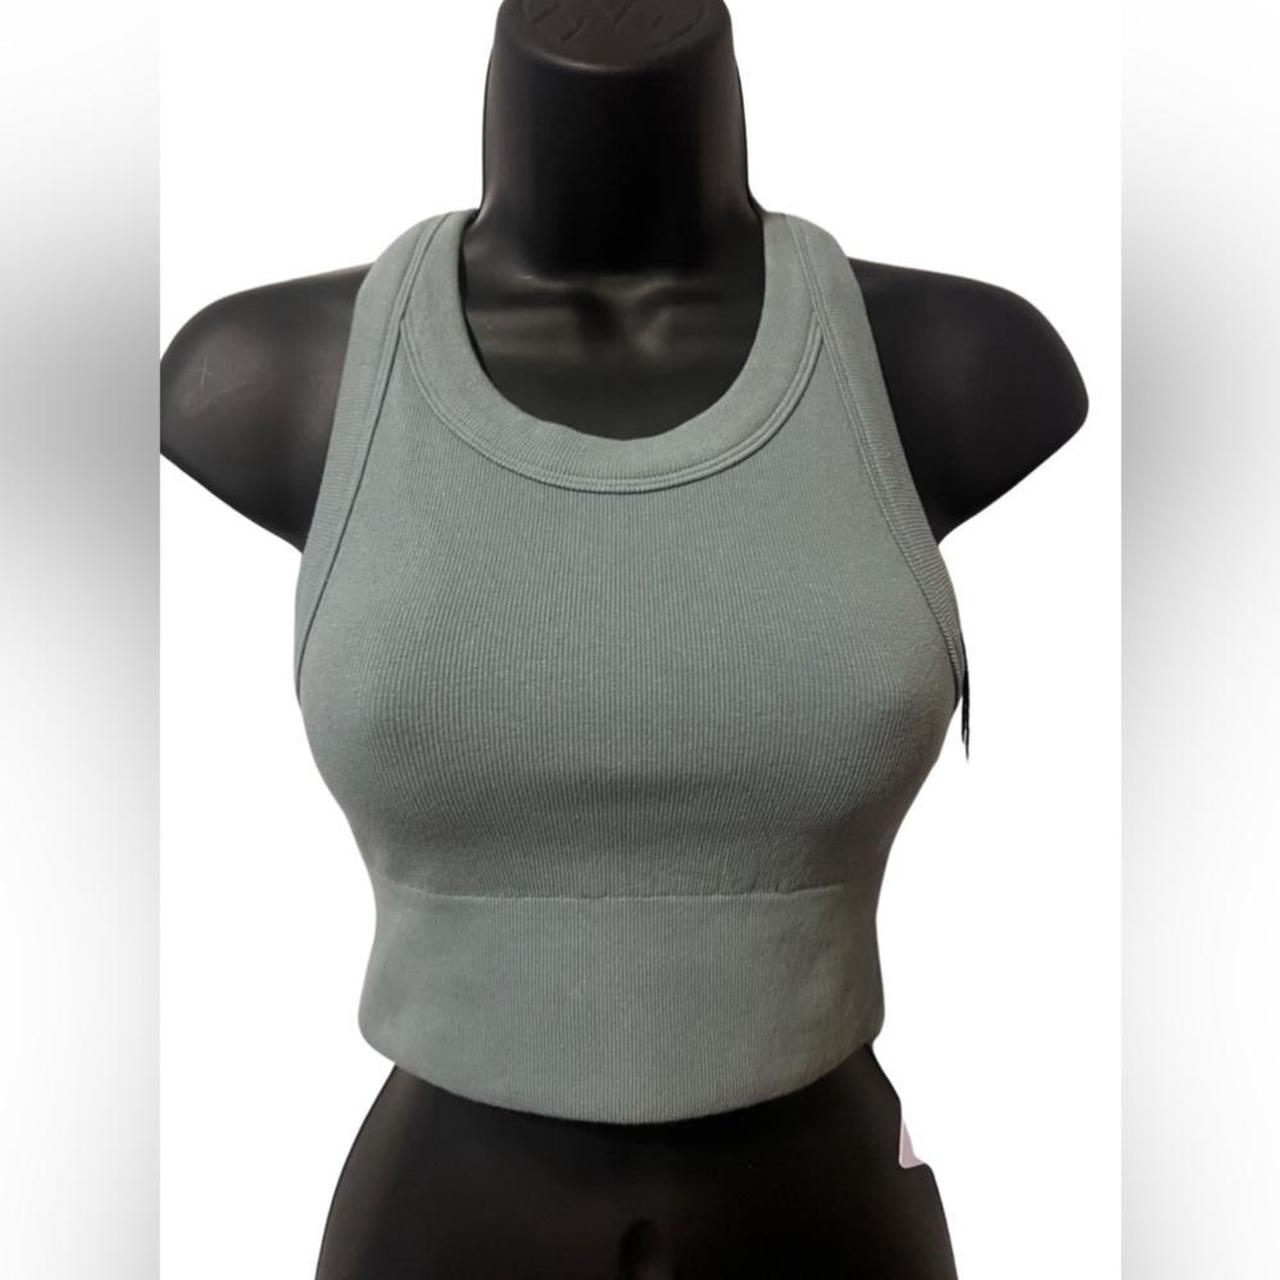 Alo Yoga seamless delight top. Super cute and - Depop